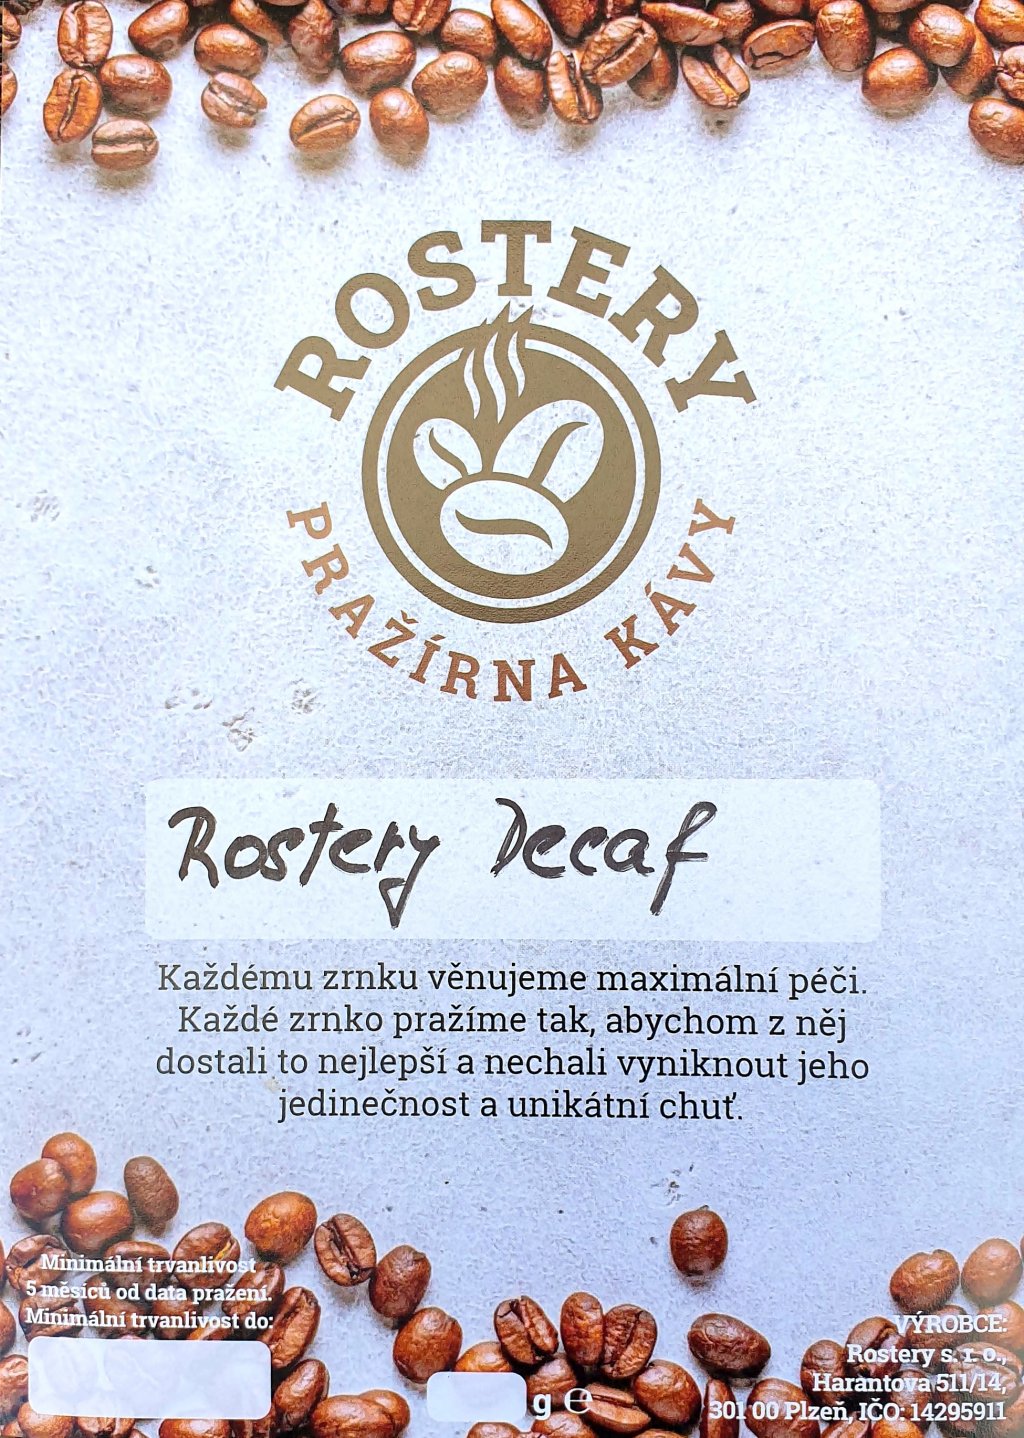 Rostery Decaf